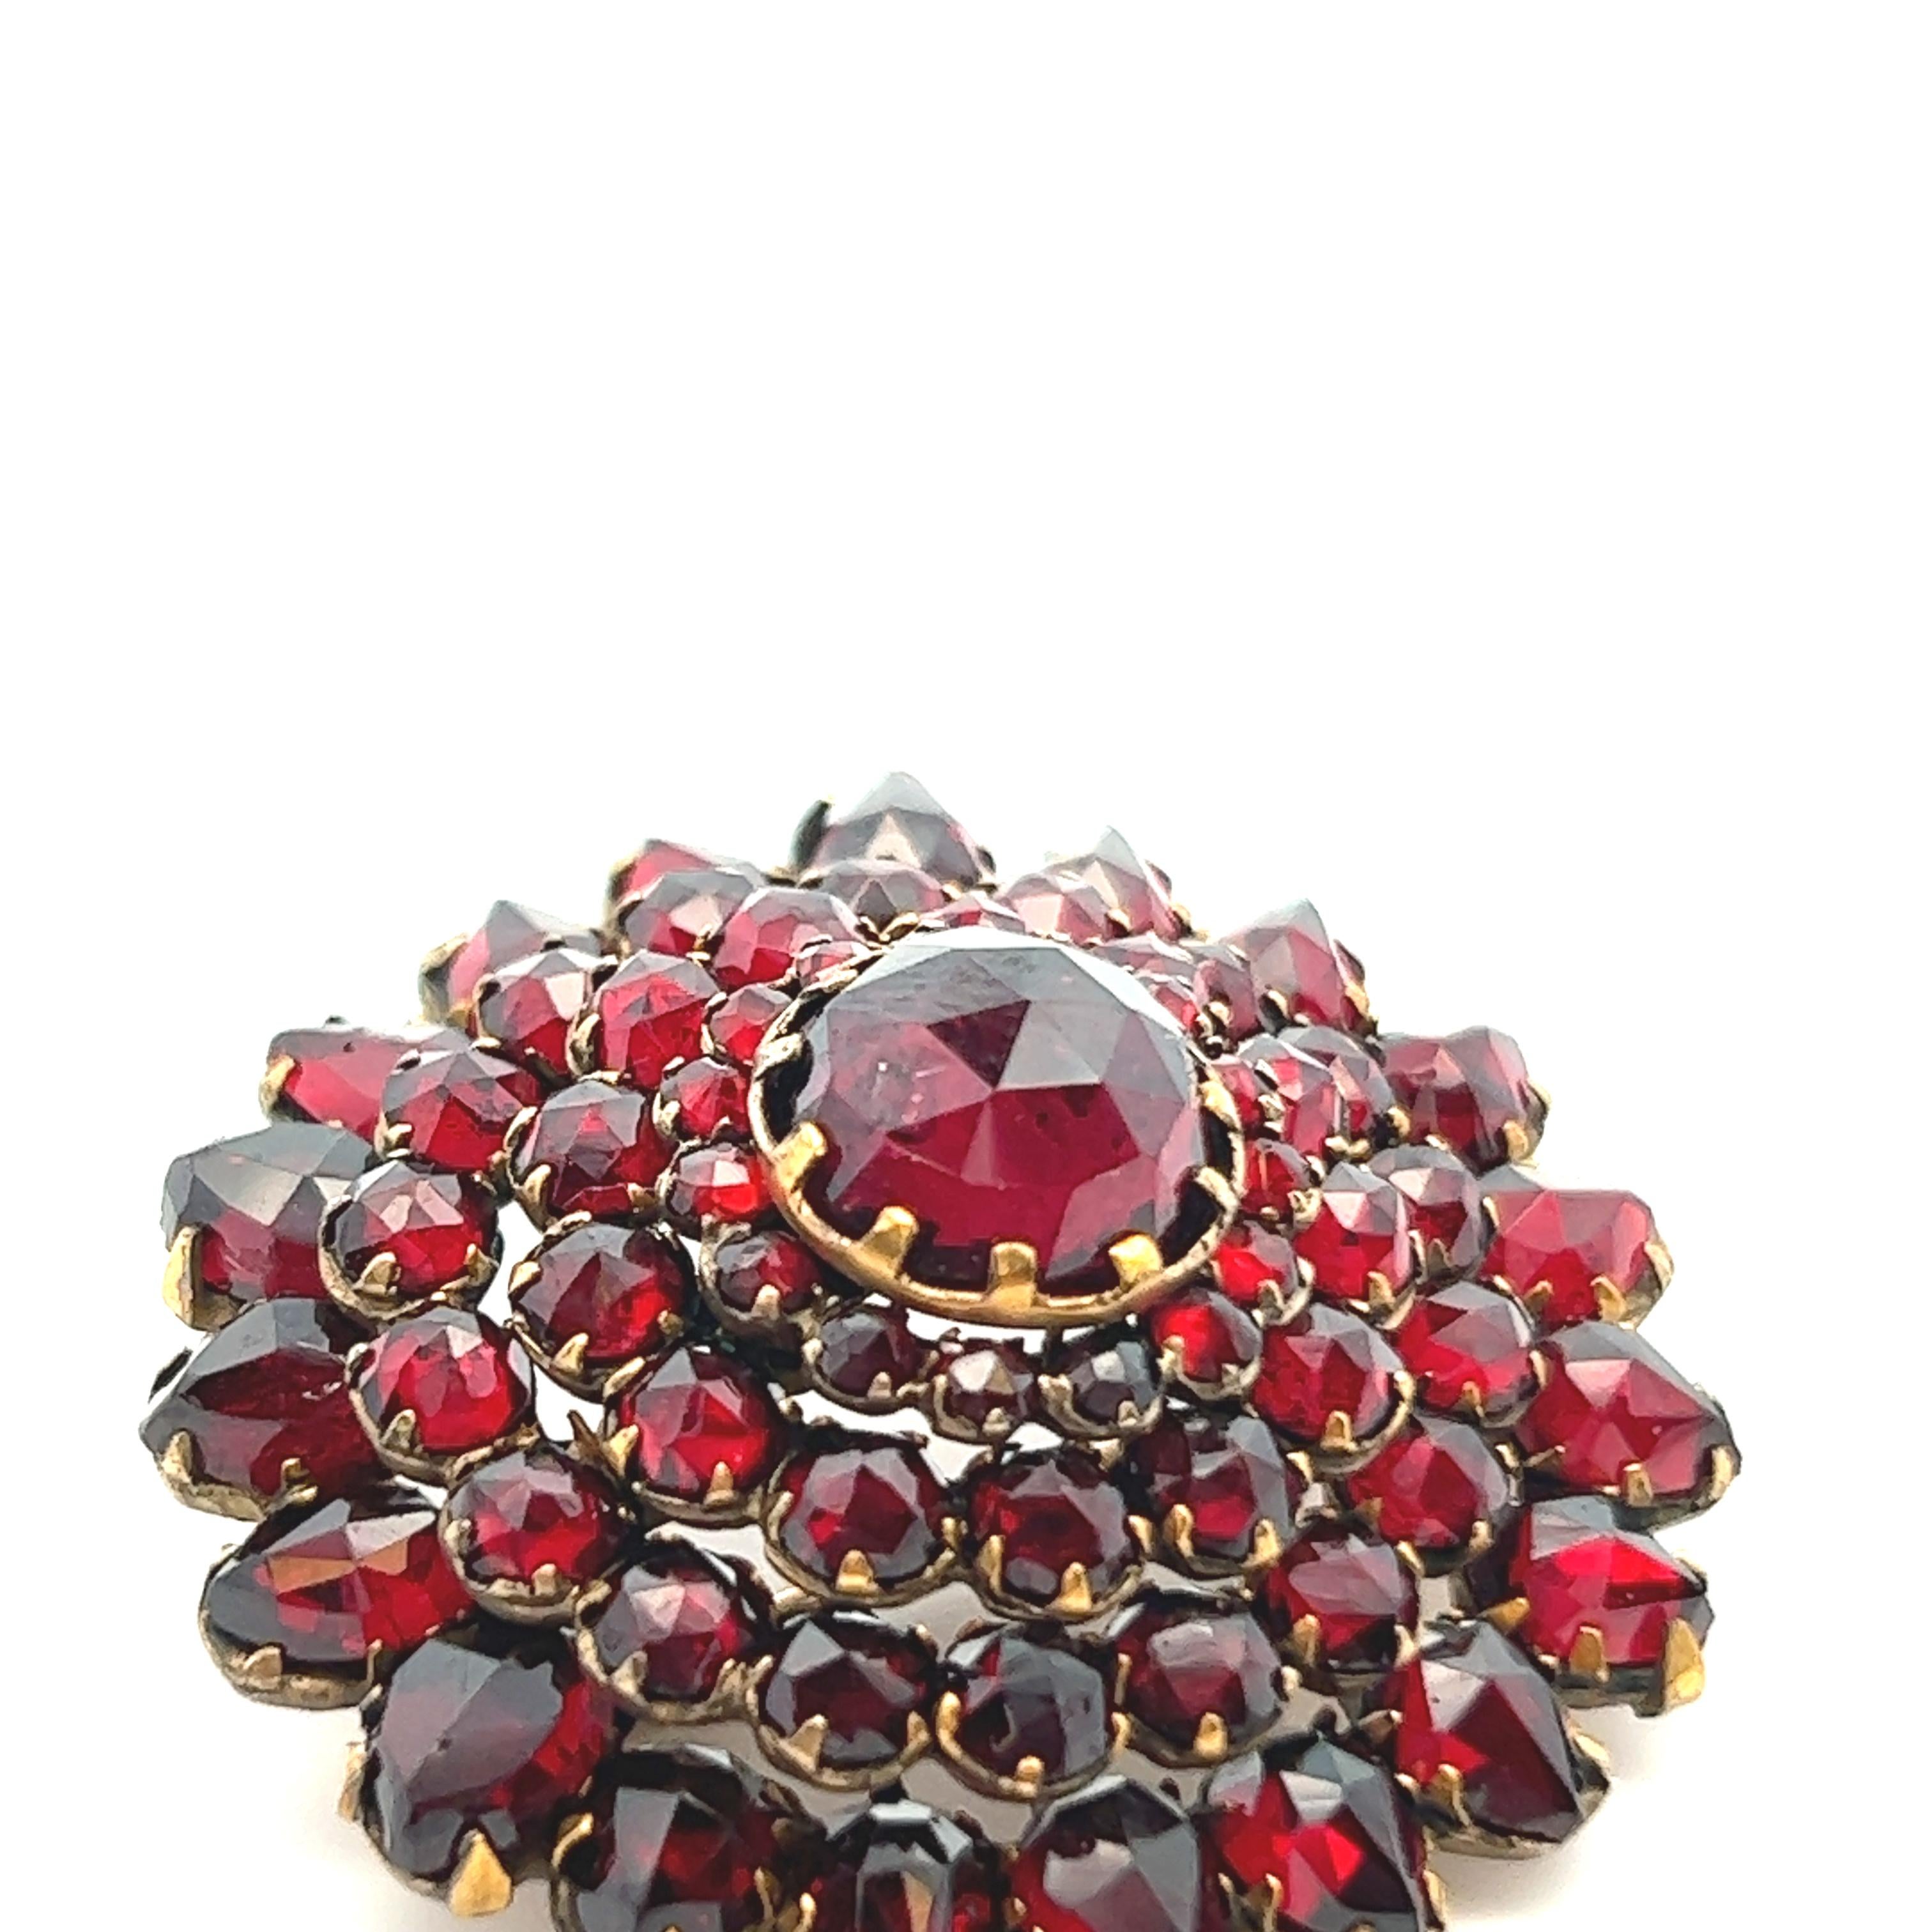 This beautiful 1890 Victorian circle pin is gold gilt over sterling silver with tiered garnet. The pin features a large 8.50mm garnet center stone, surrounded by four more layers of varying sized garnet (2.00mm-8.50mm) to give the pin a full garnet